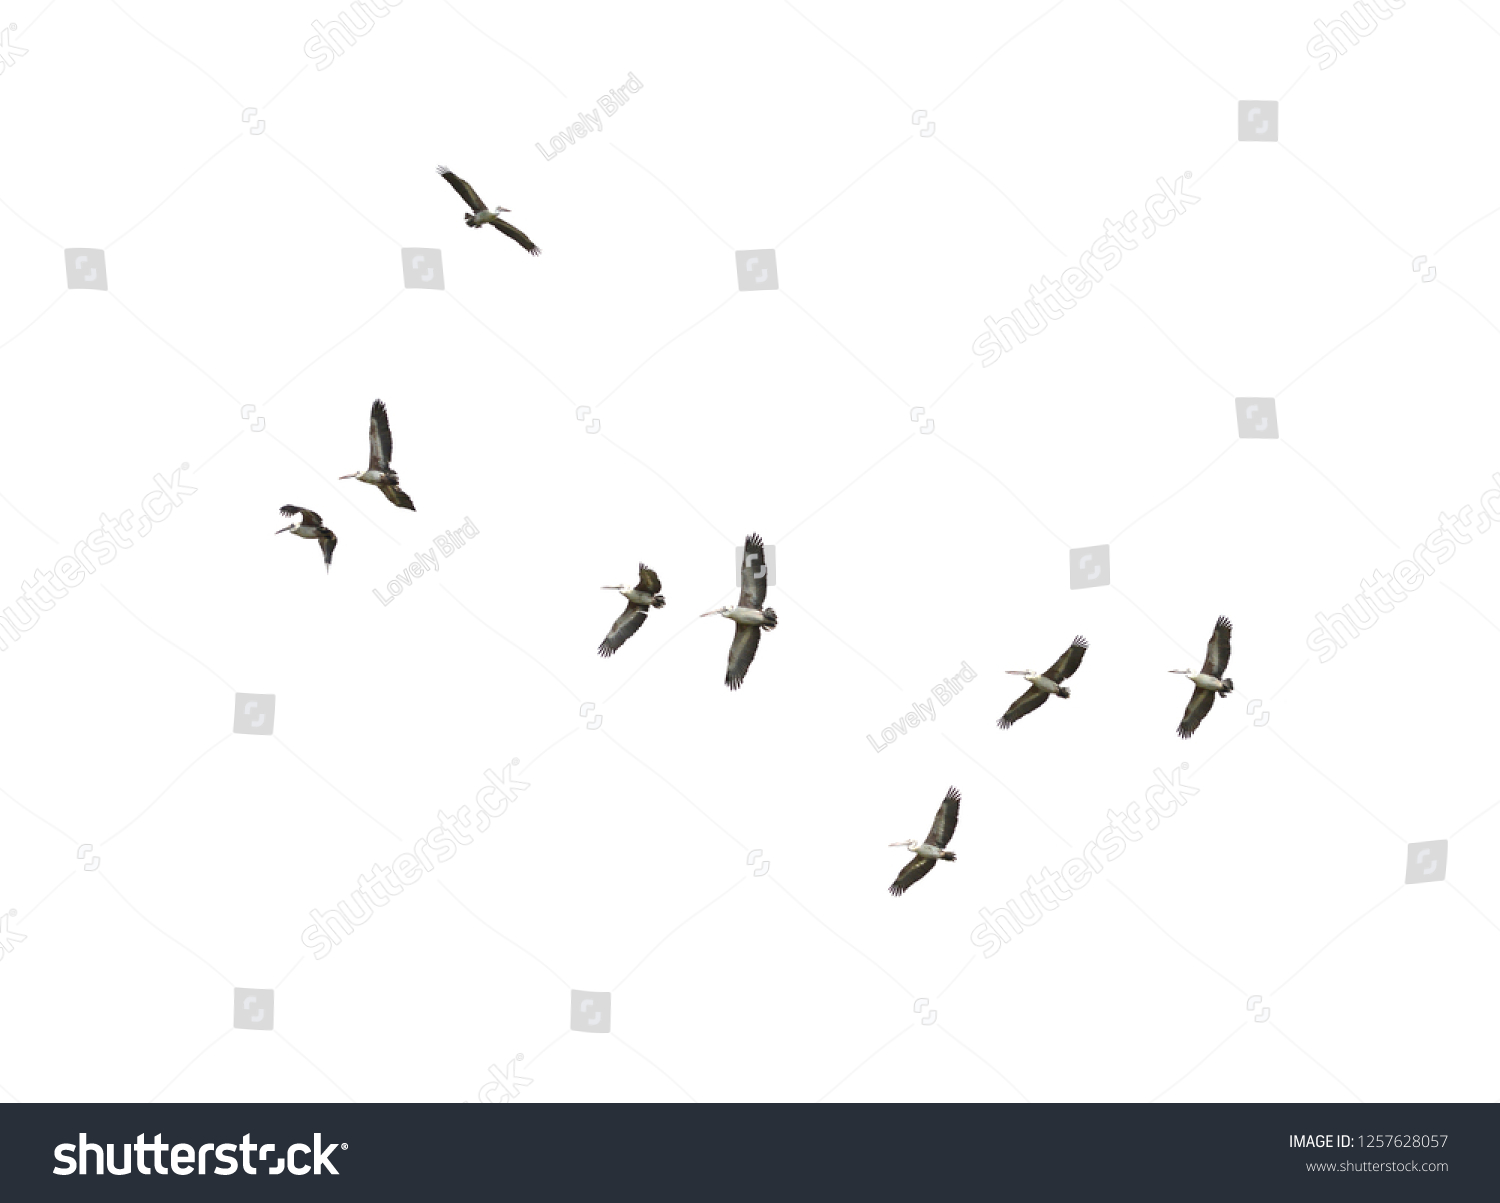 Flock of Bird flying isolated over white background Spot-billed pelican or grey pelican (Pelecanus philippensis)  #1257628057